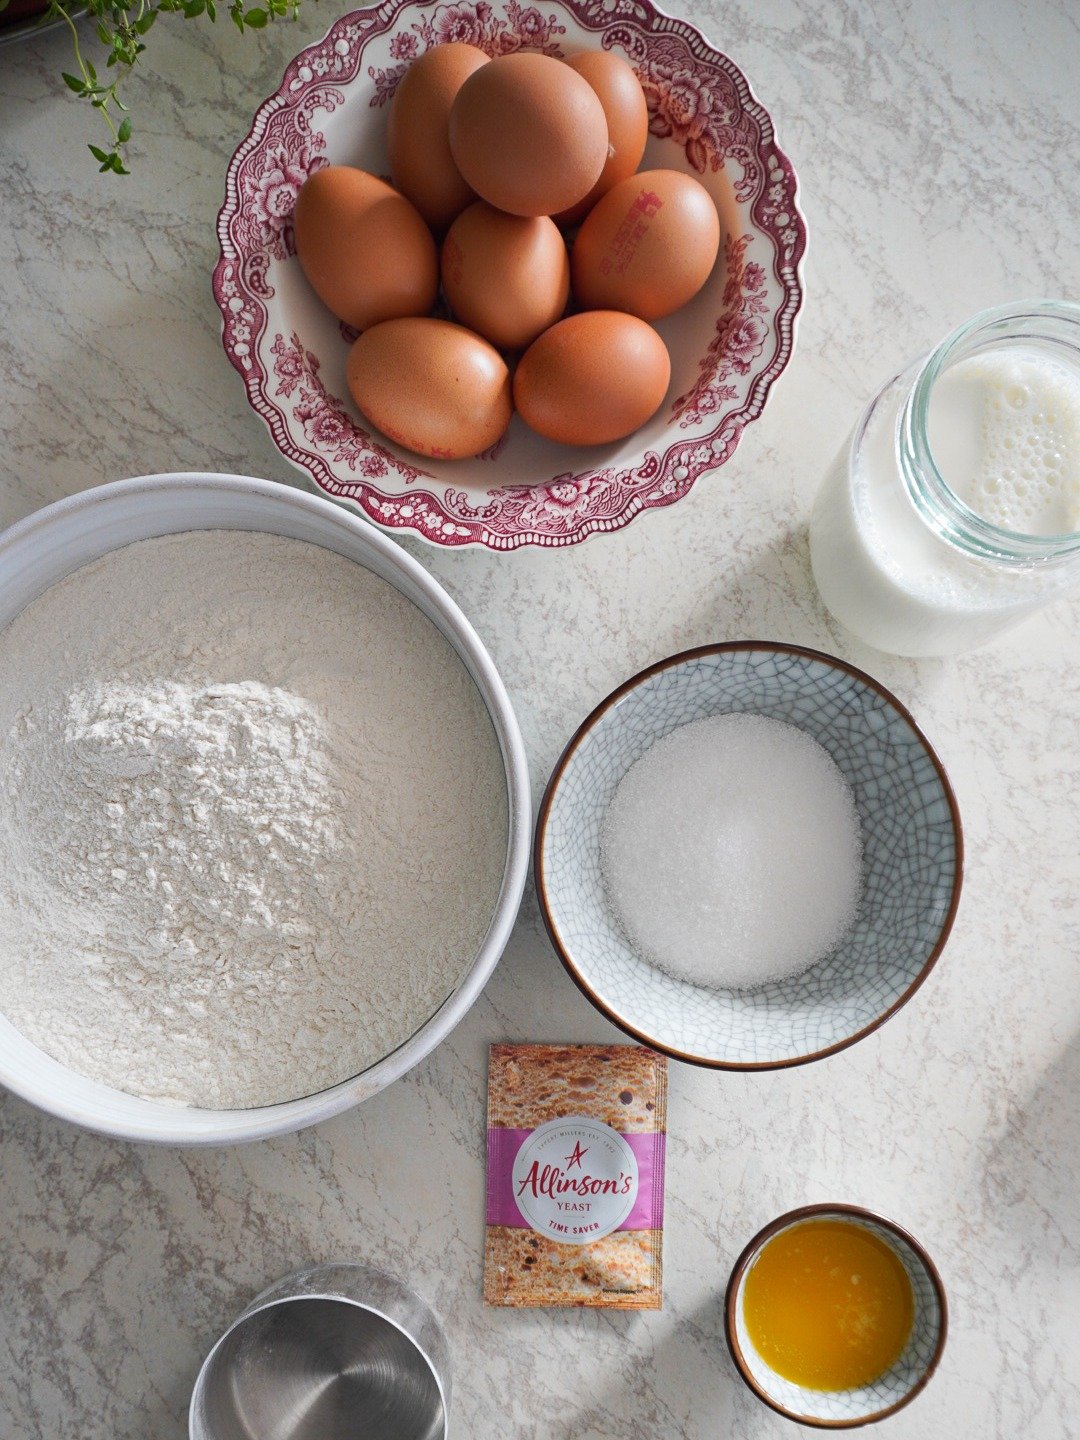 Prepare your ingredients before hand to make your step by step as easy as possible.